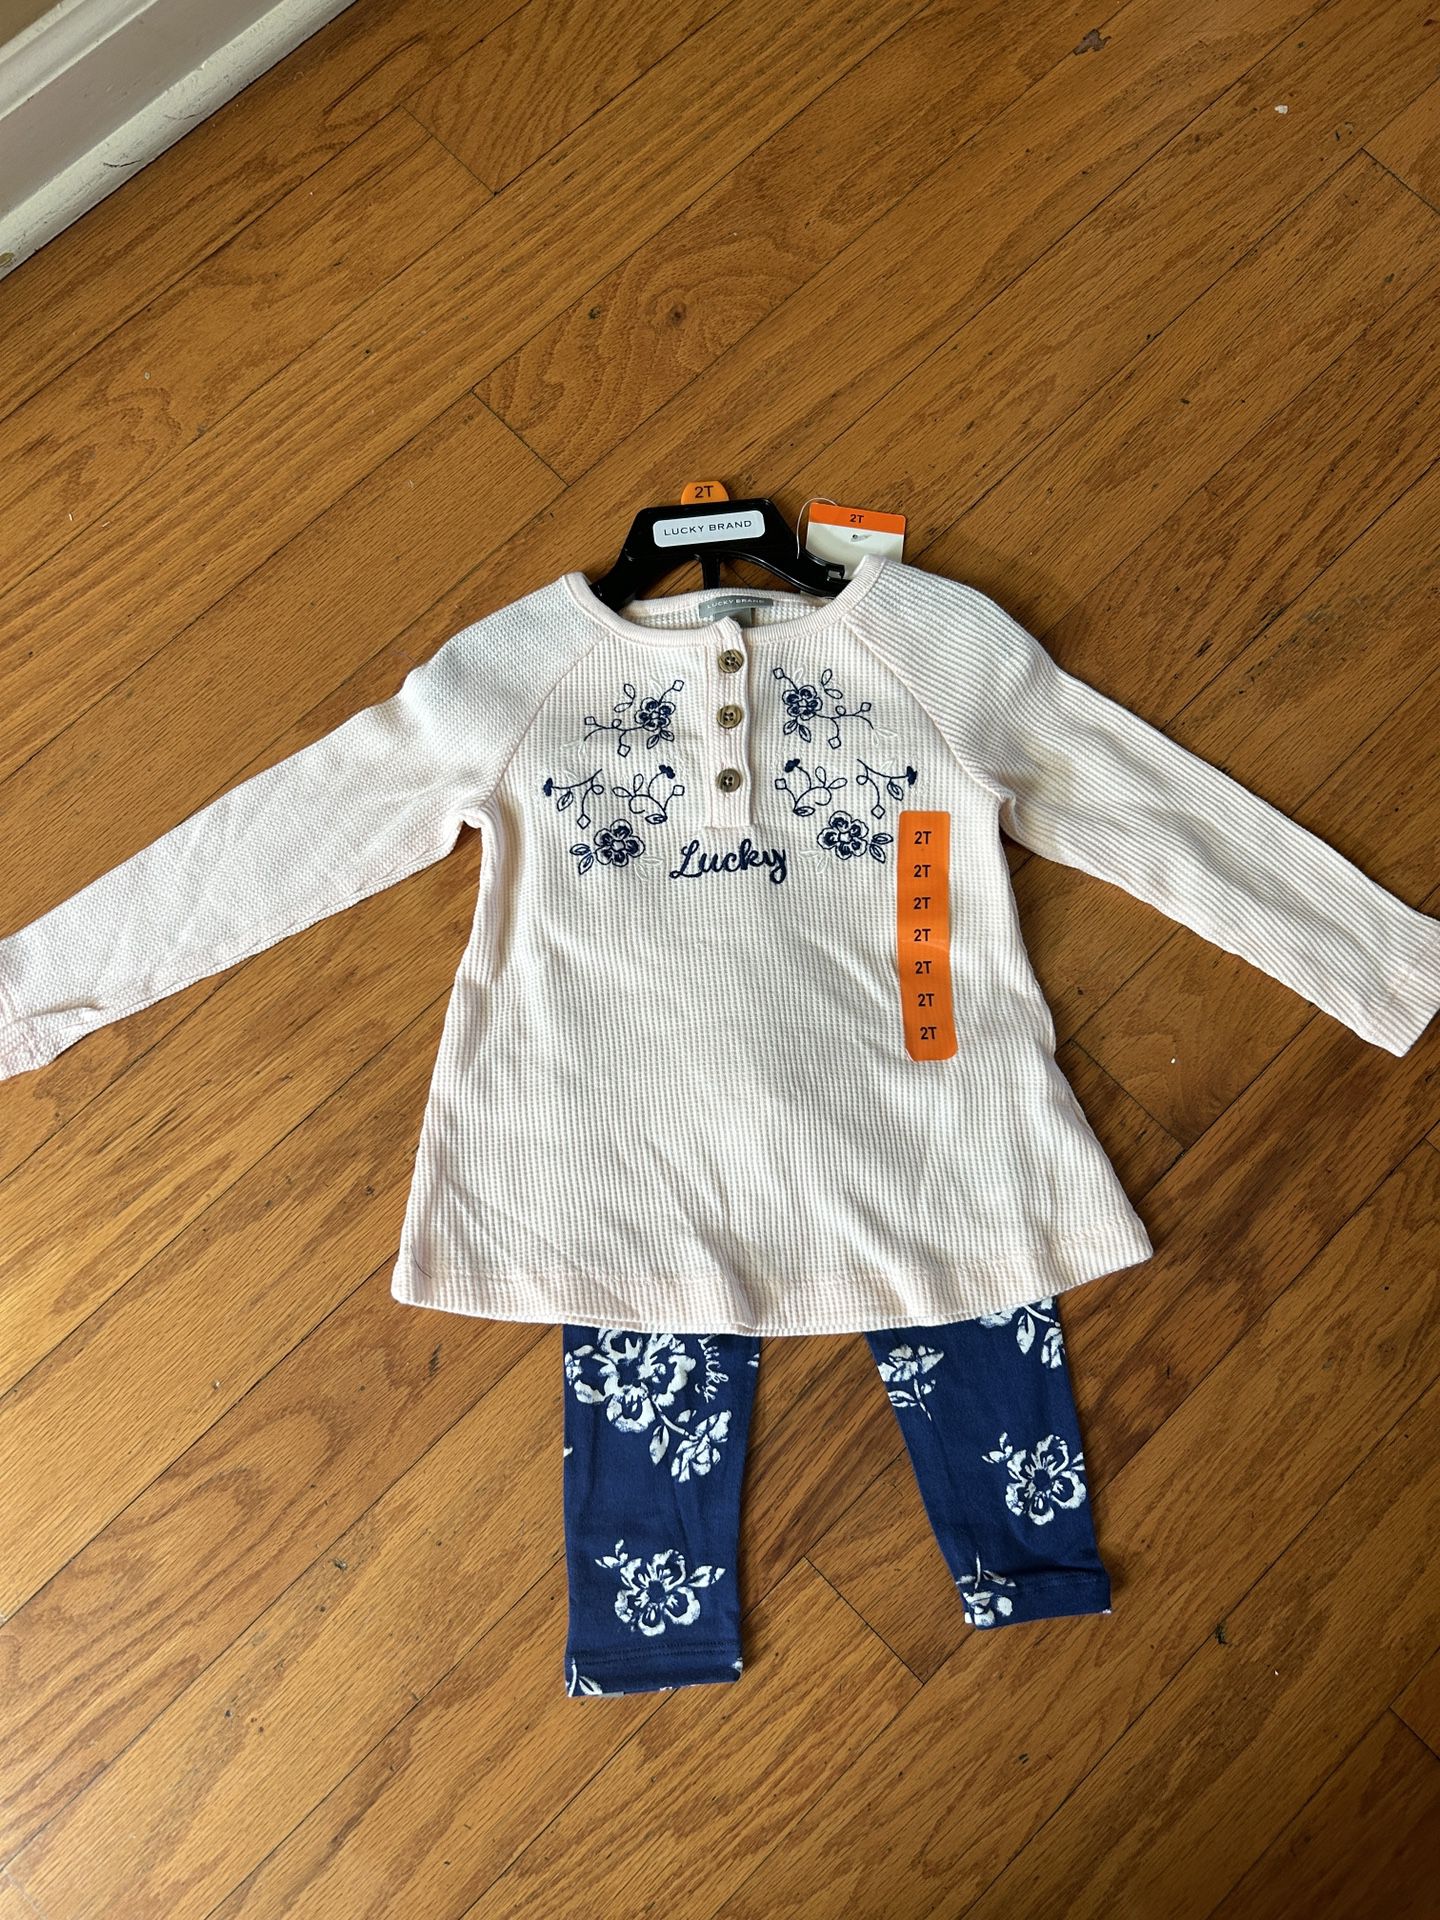 NWT Lucky Brand Girls 2pcs outfit set size 2T